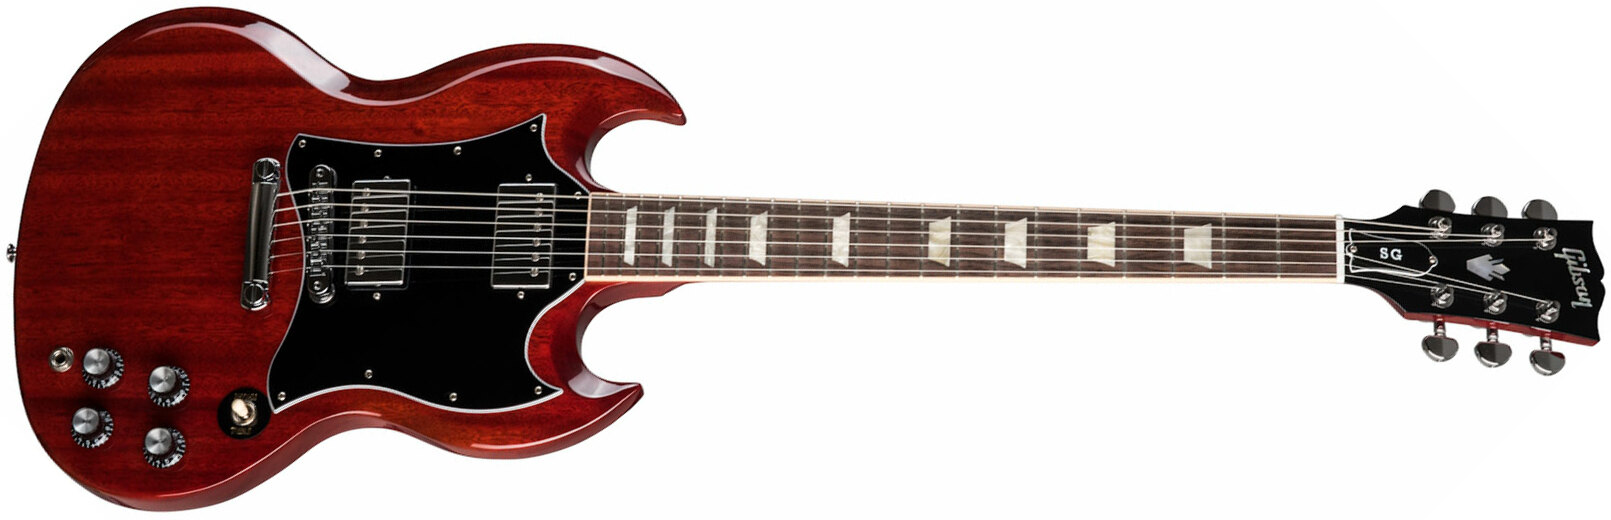 Gibson Sg Standard 2h Ht Rw - Heritage Cherry - Double Cut E-Gitarre - Main picture